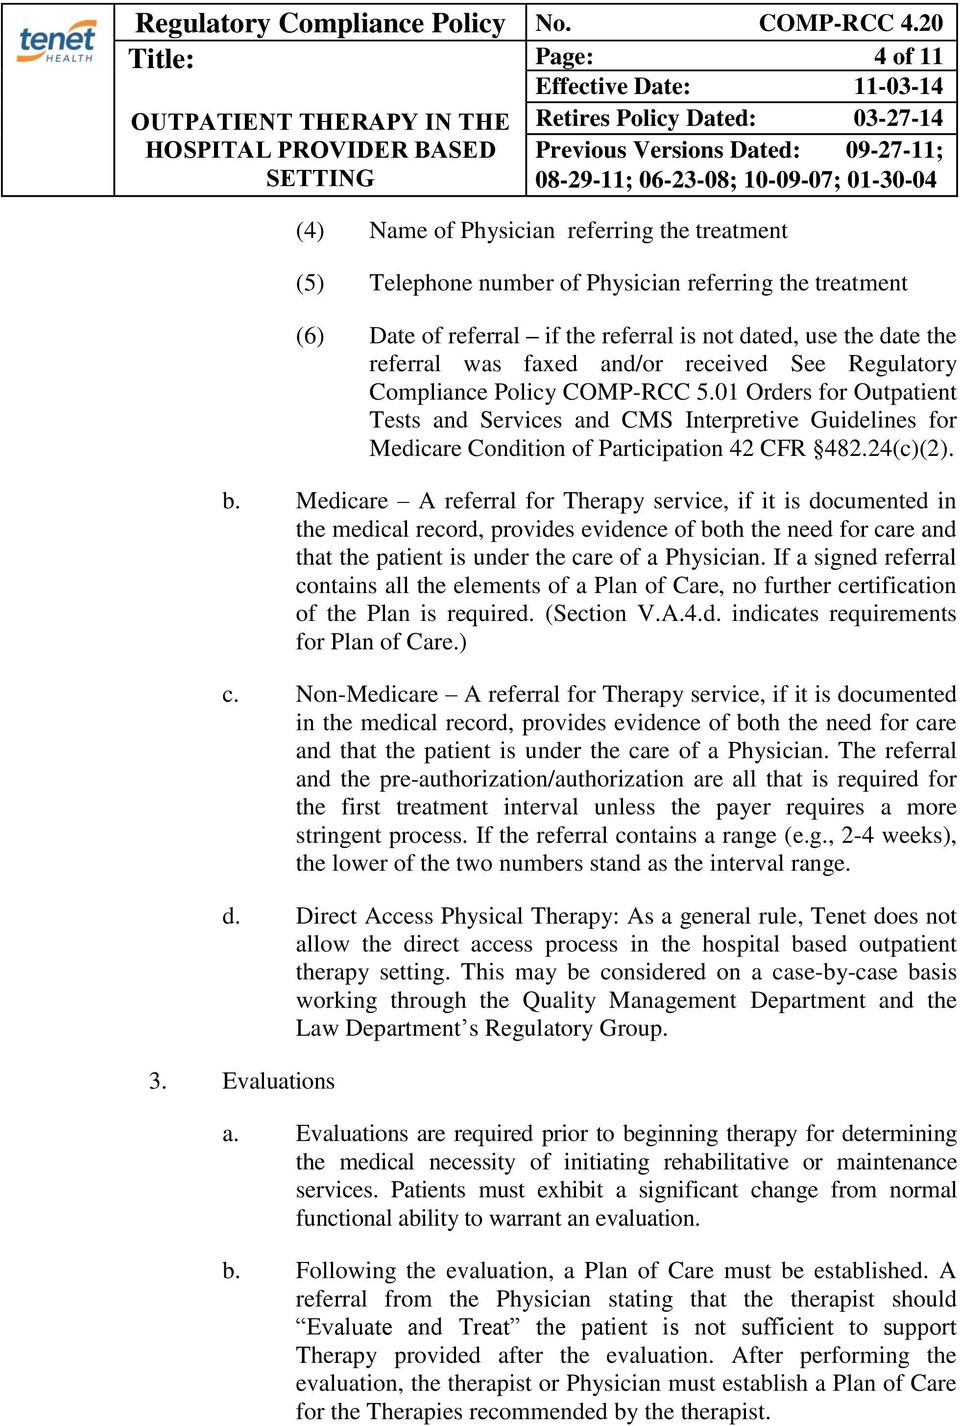 24(c)(2). b. Medicare A referral for Therapy service, if it is documented in the medical record, provides evidence of both the need for care and that the patient is under the care of a Physician.